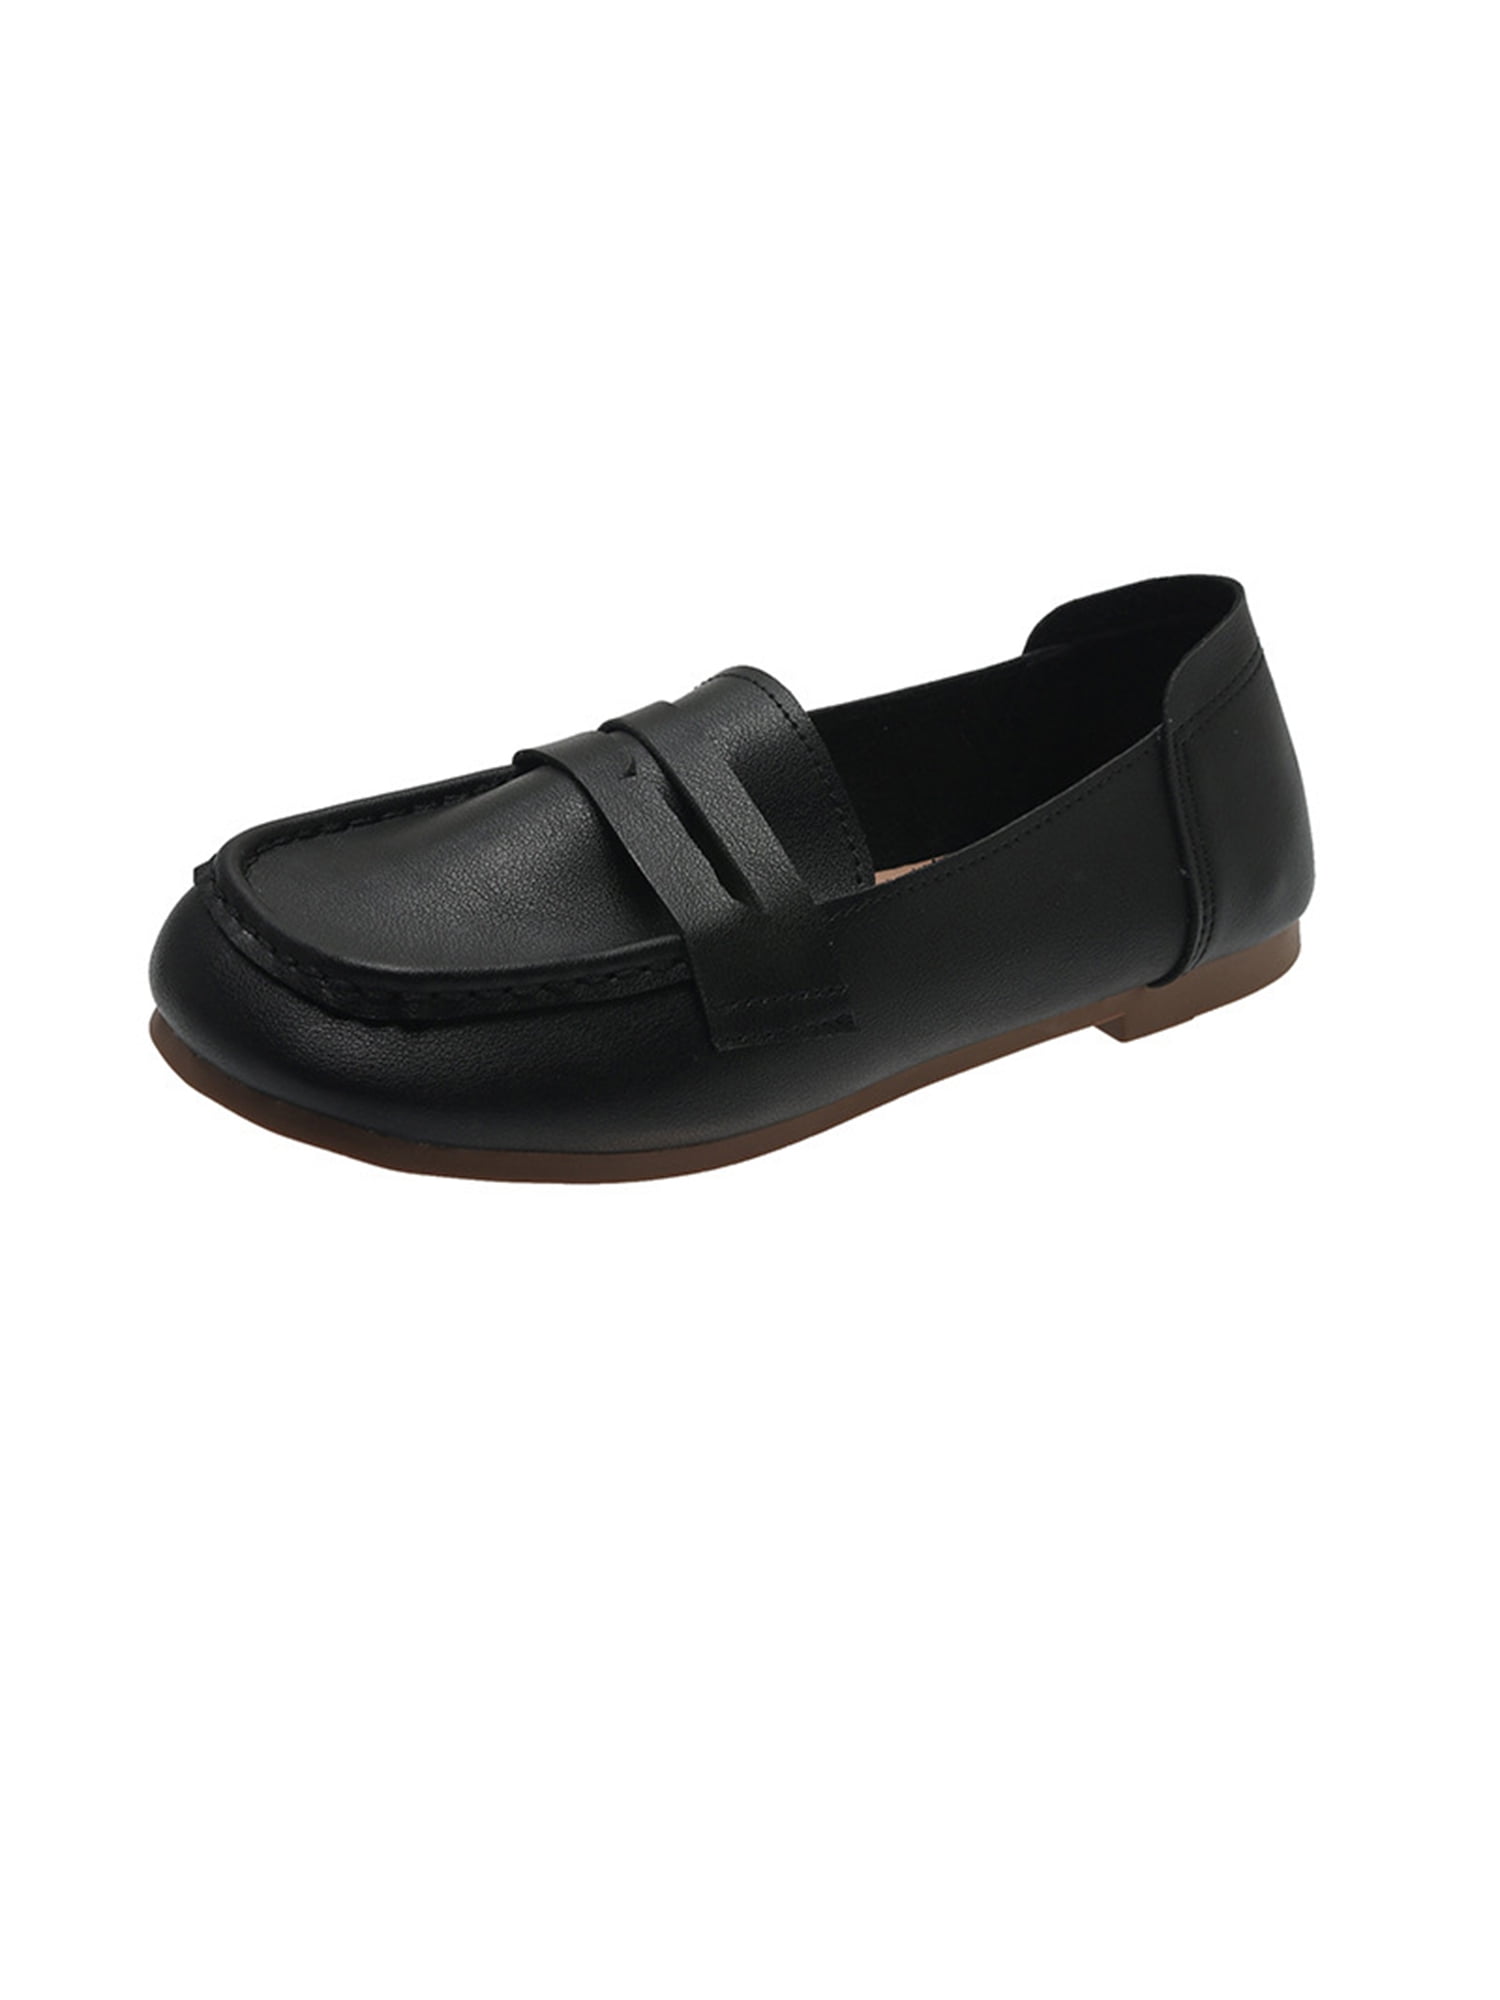 Womens Shoes Flats and flat shoes Loafers and moccasins Aerosoles Penny Driver Moccasins in Black 